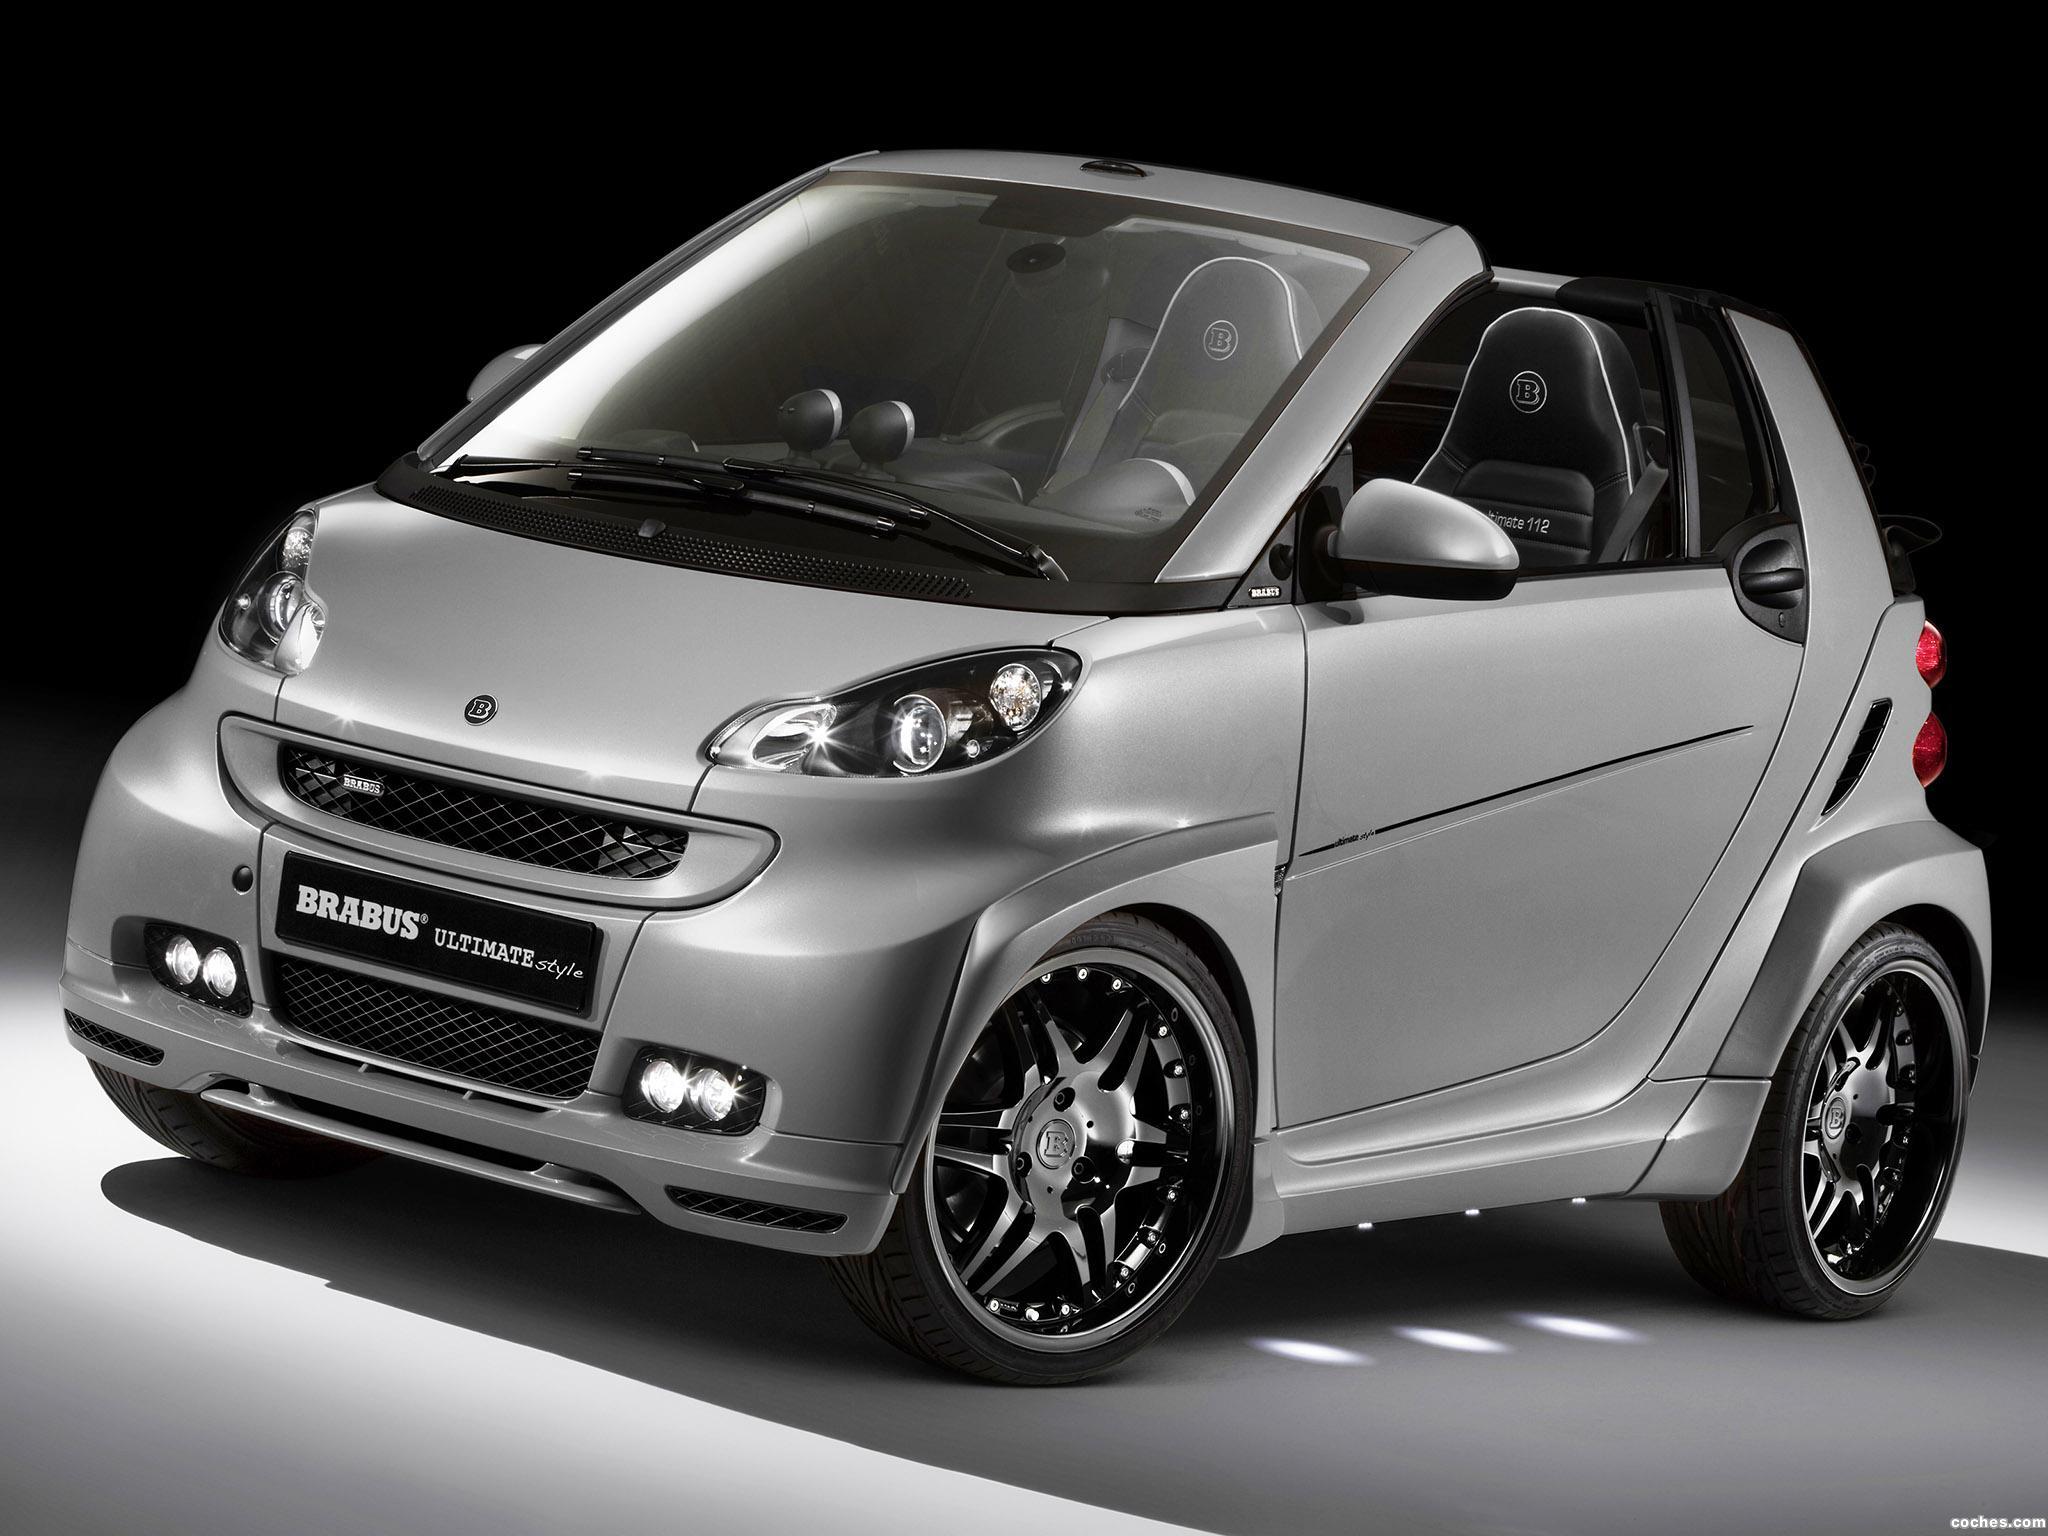 brabus_smart-fortwo-ultimate-style-2011_r9